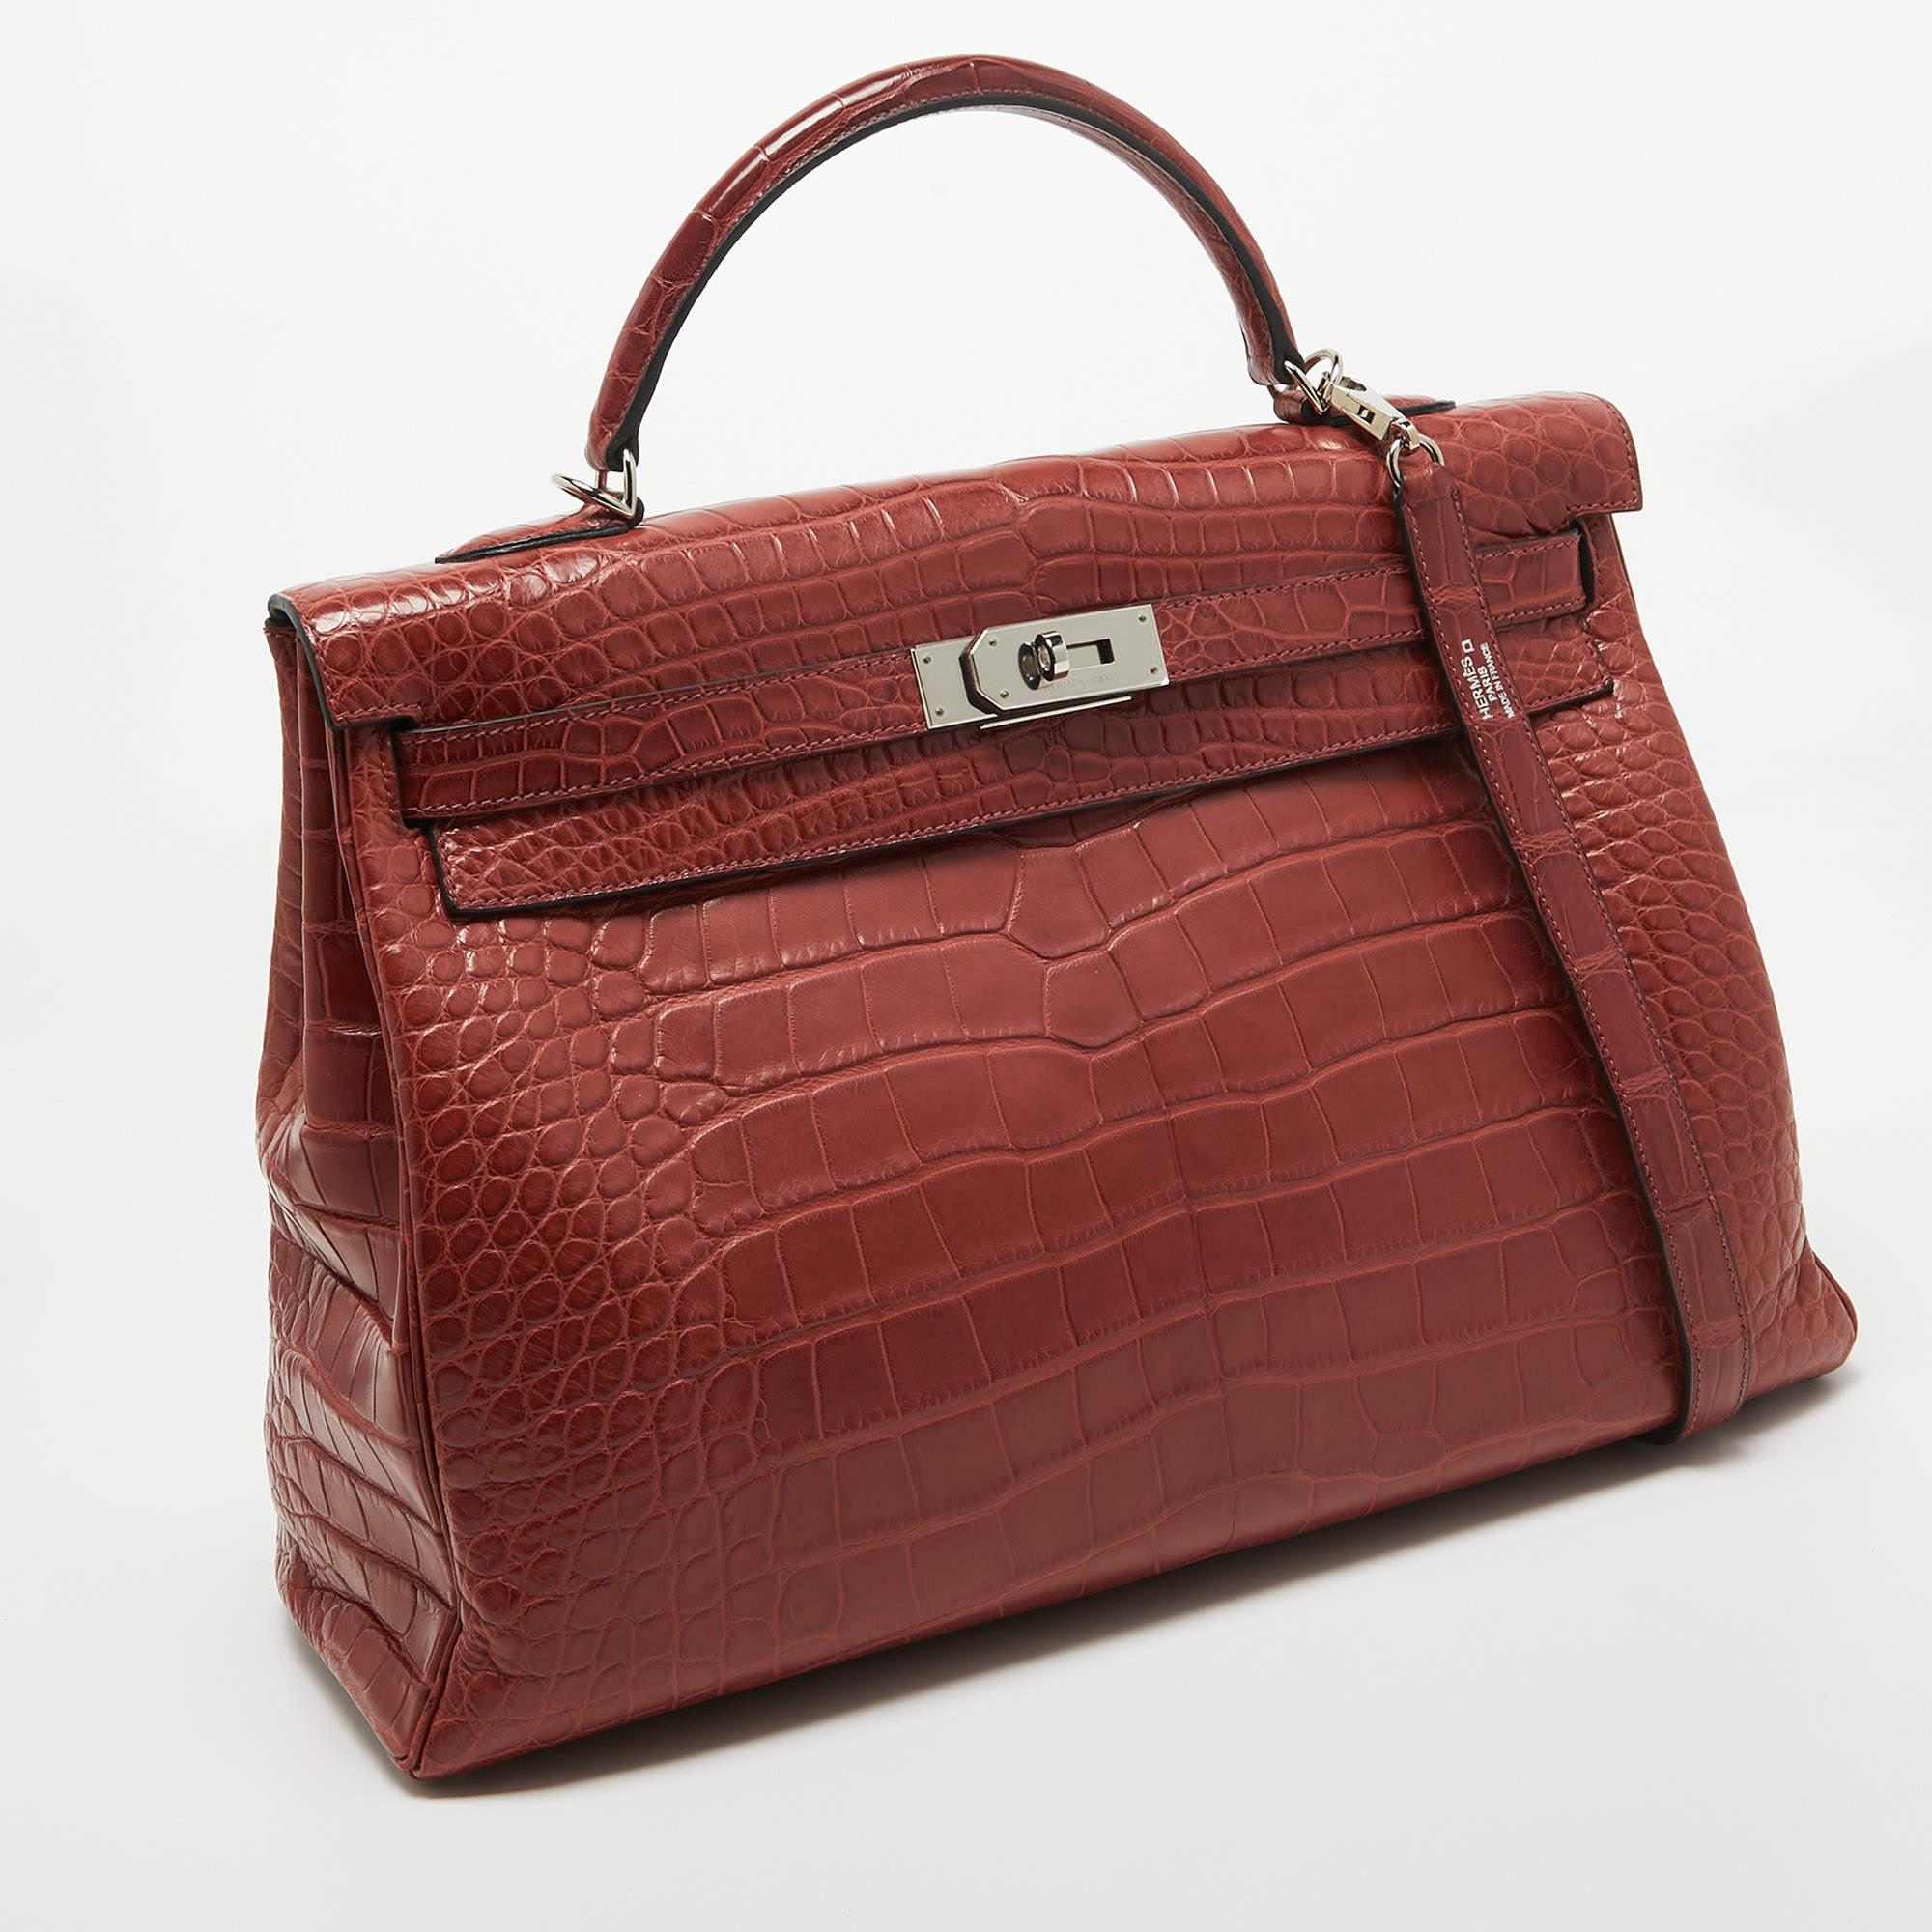 When it comes to beautiful bags, there are hardly any that can come close to the Hermès Kelly. It is a creation filled with beauty, utility, and value. We have here the Kelly Retourne 40 in palladium-finished hardware. Carefully hand-stitched to